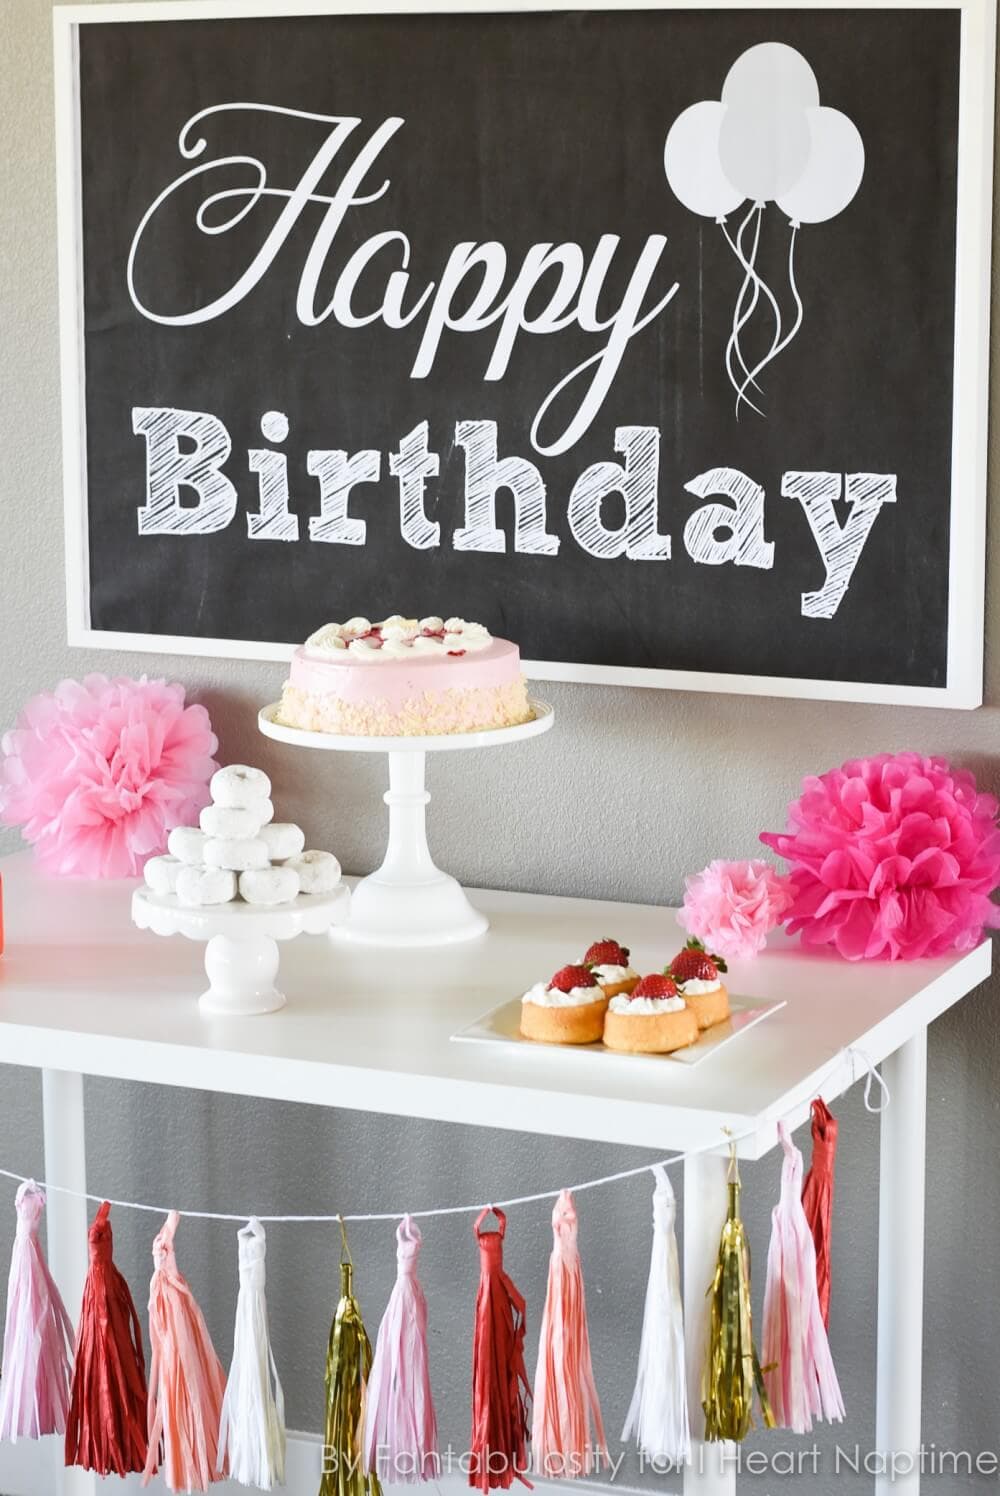 Free Happy Birthday Backdrop - Quickly decorate your dessert table for a birthday party, by simply adding this "Happy Birthday" printable to your display!